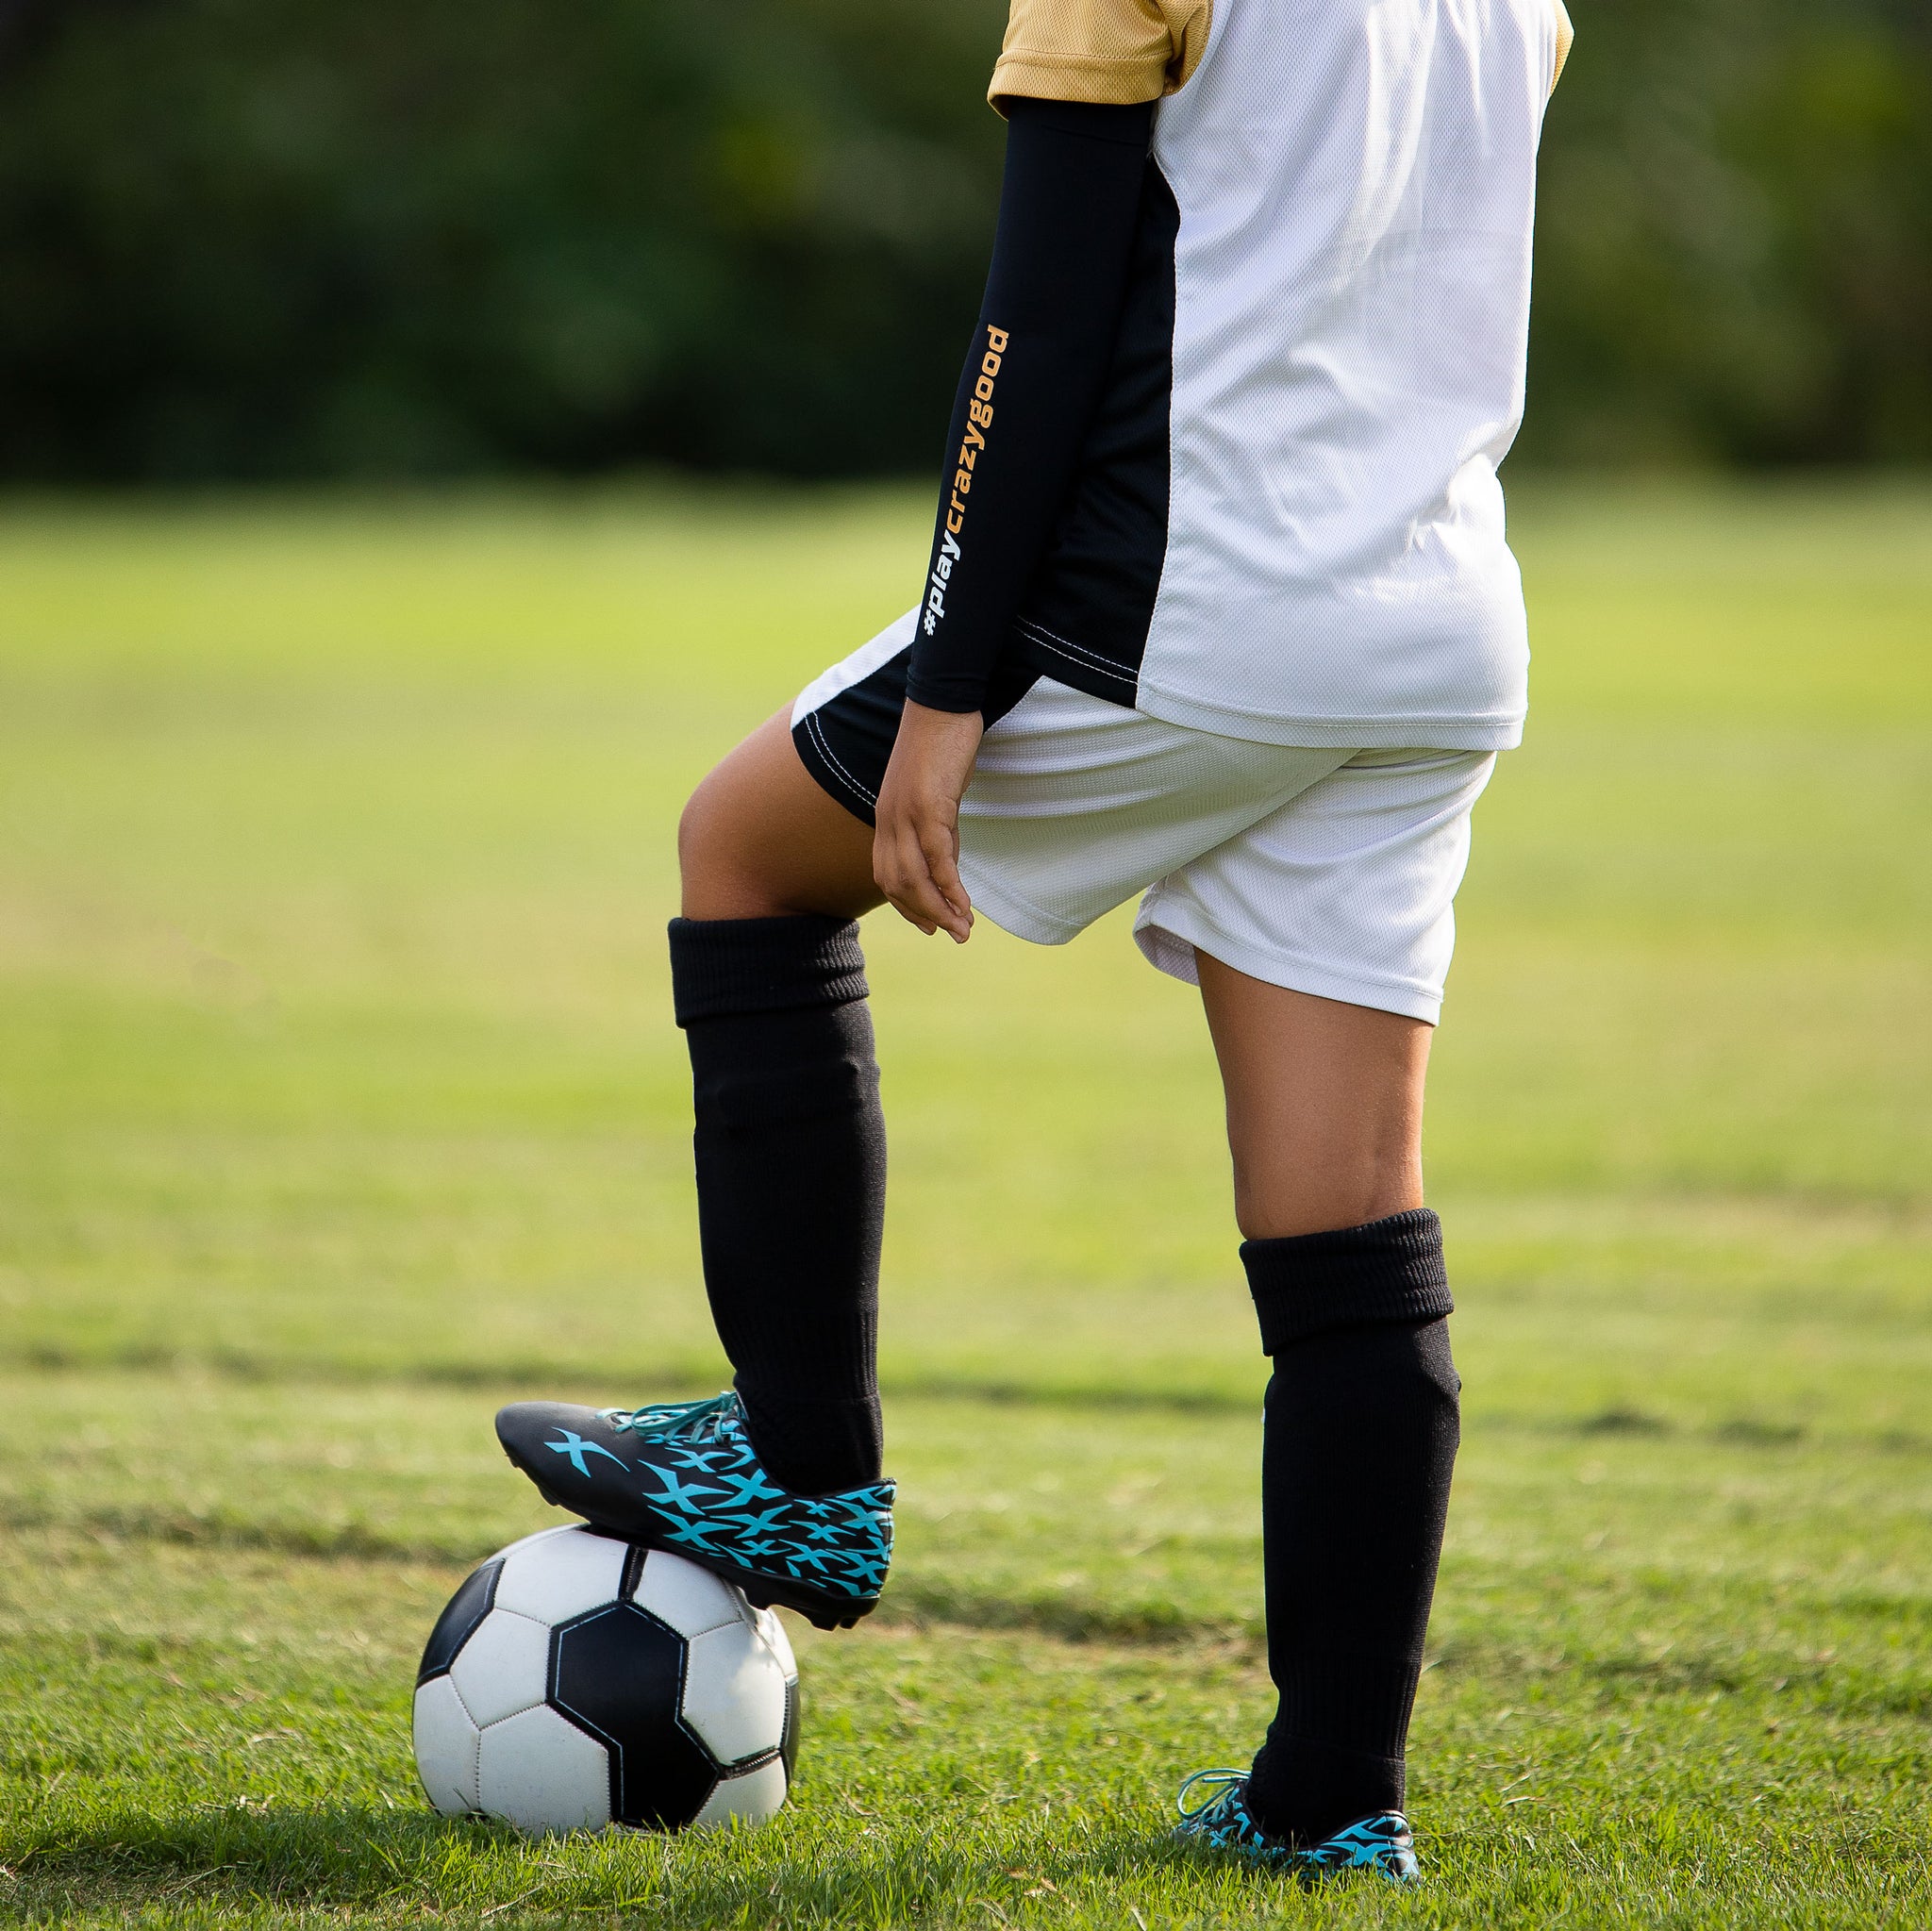 Safe and Stylish with Crazy Arms: The Best Arm Sleeves for Kids' Sports